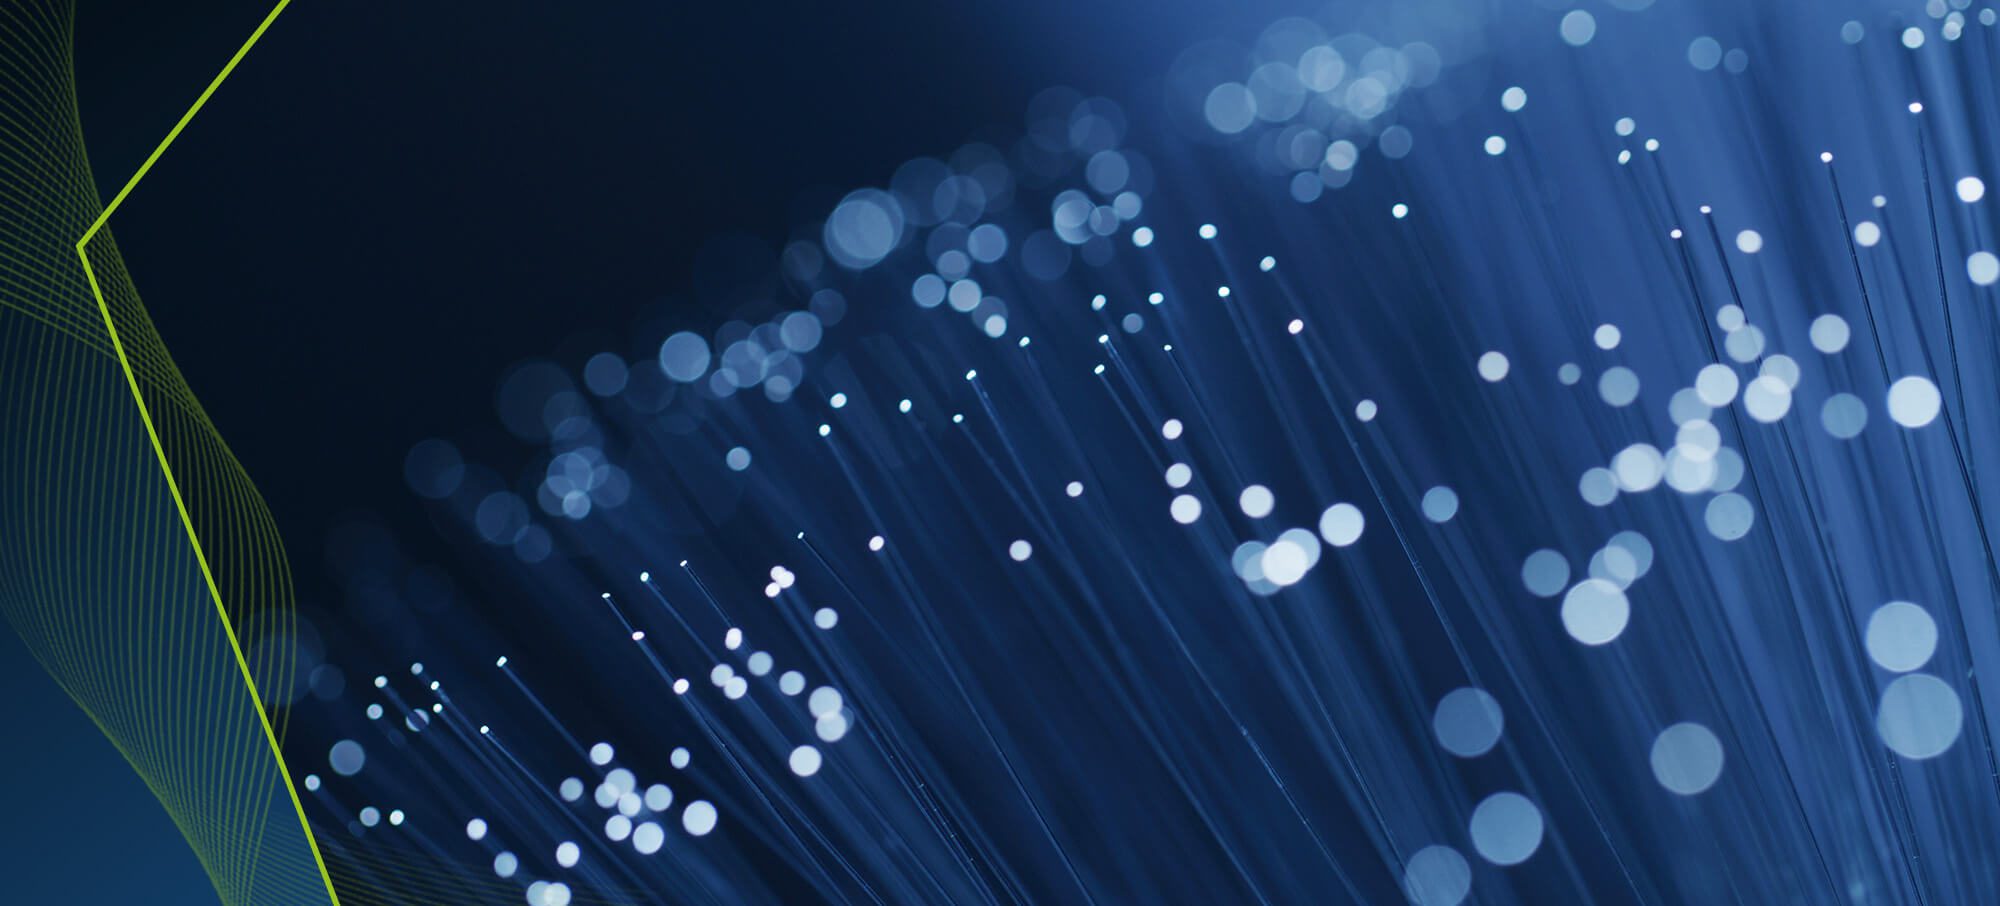 Optical fiber cables with blue lighting